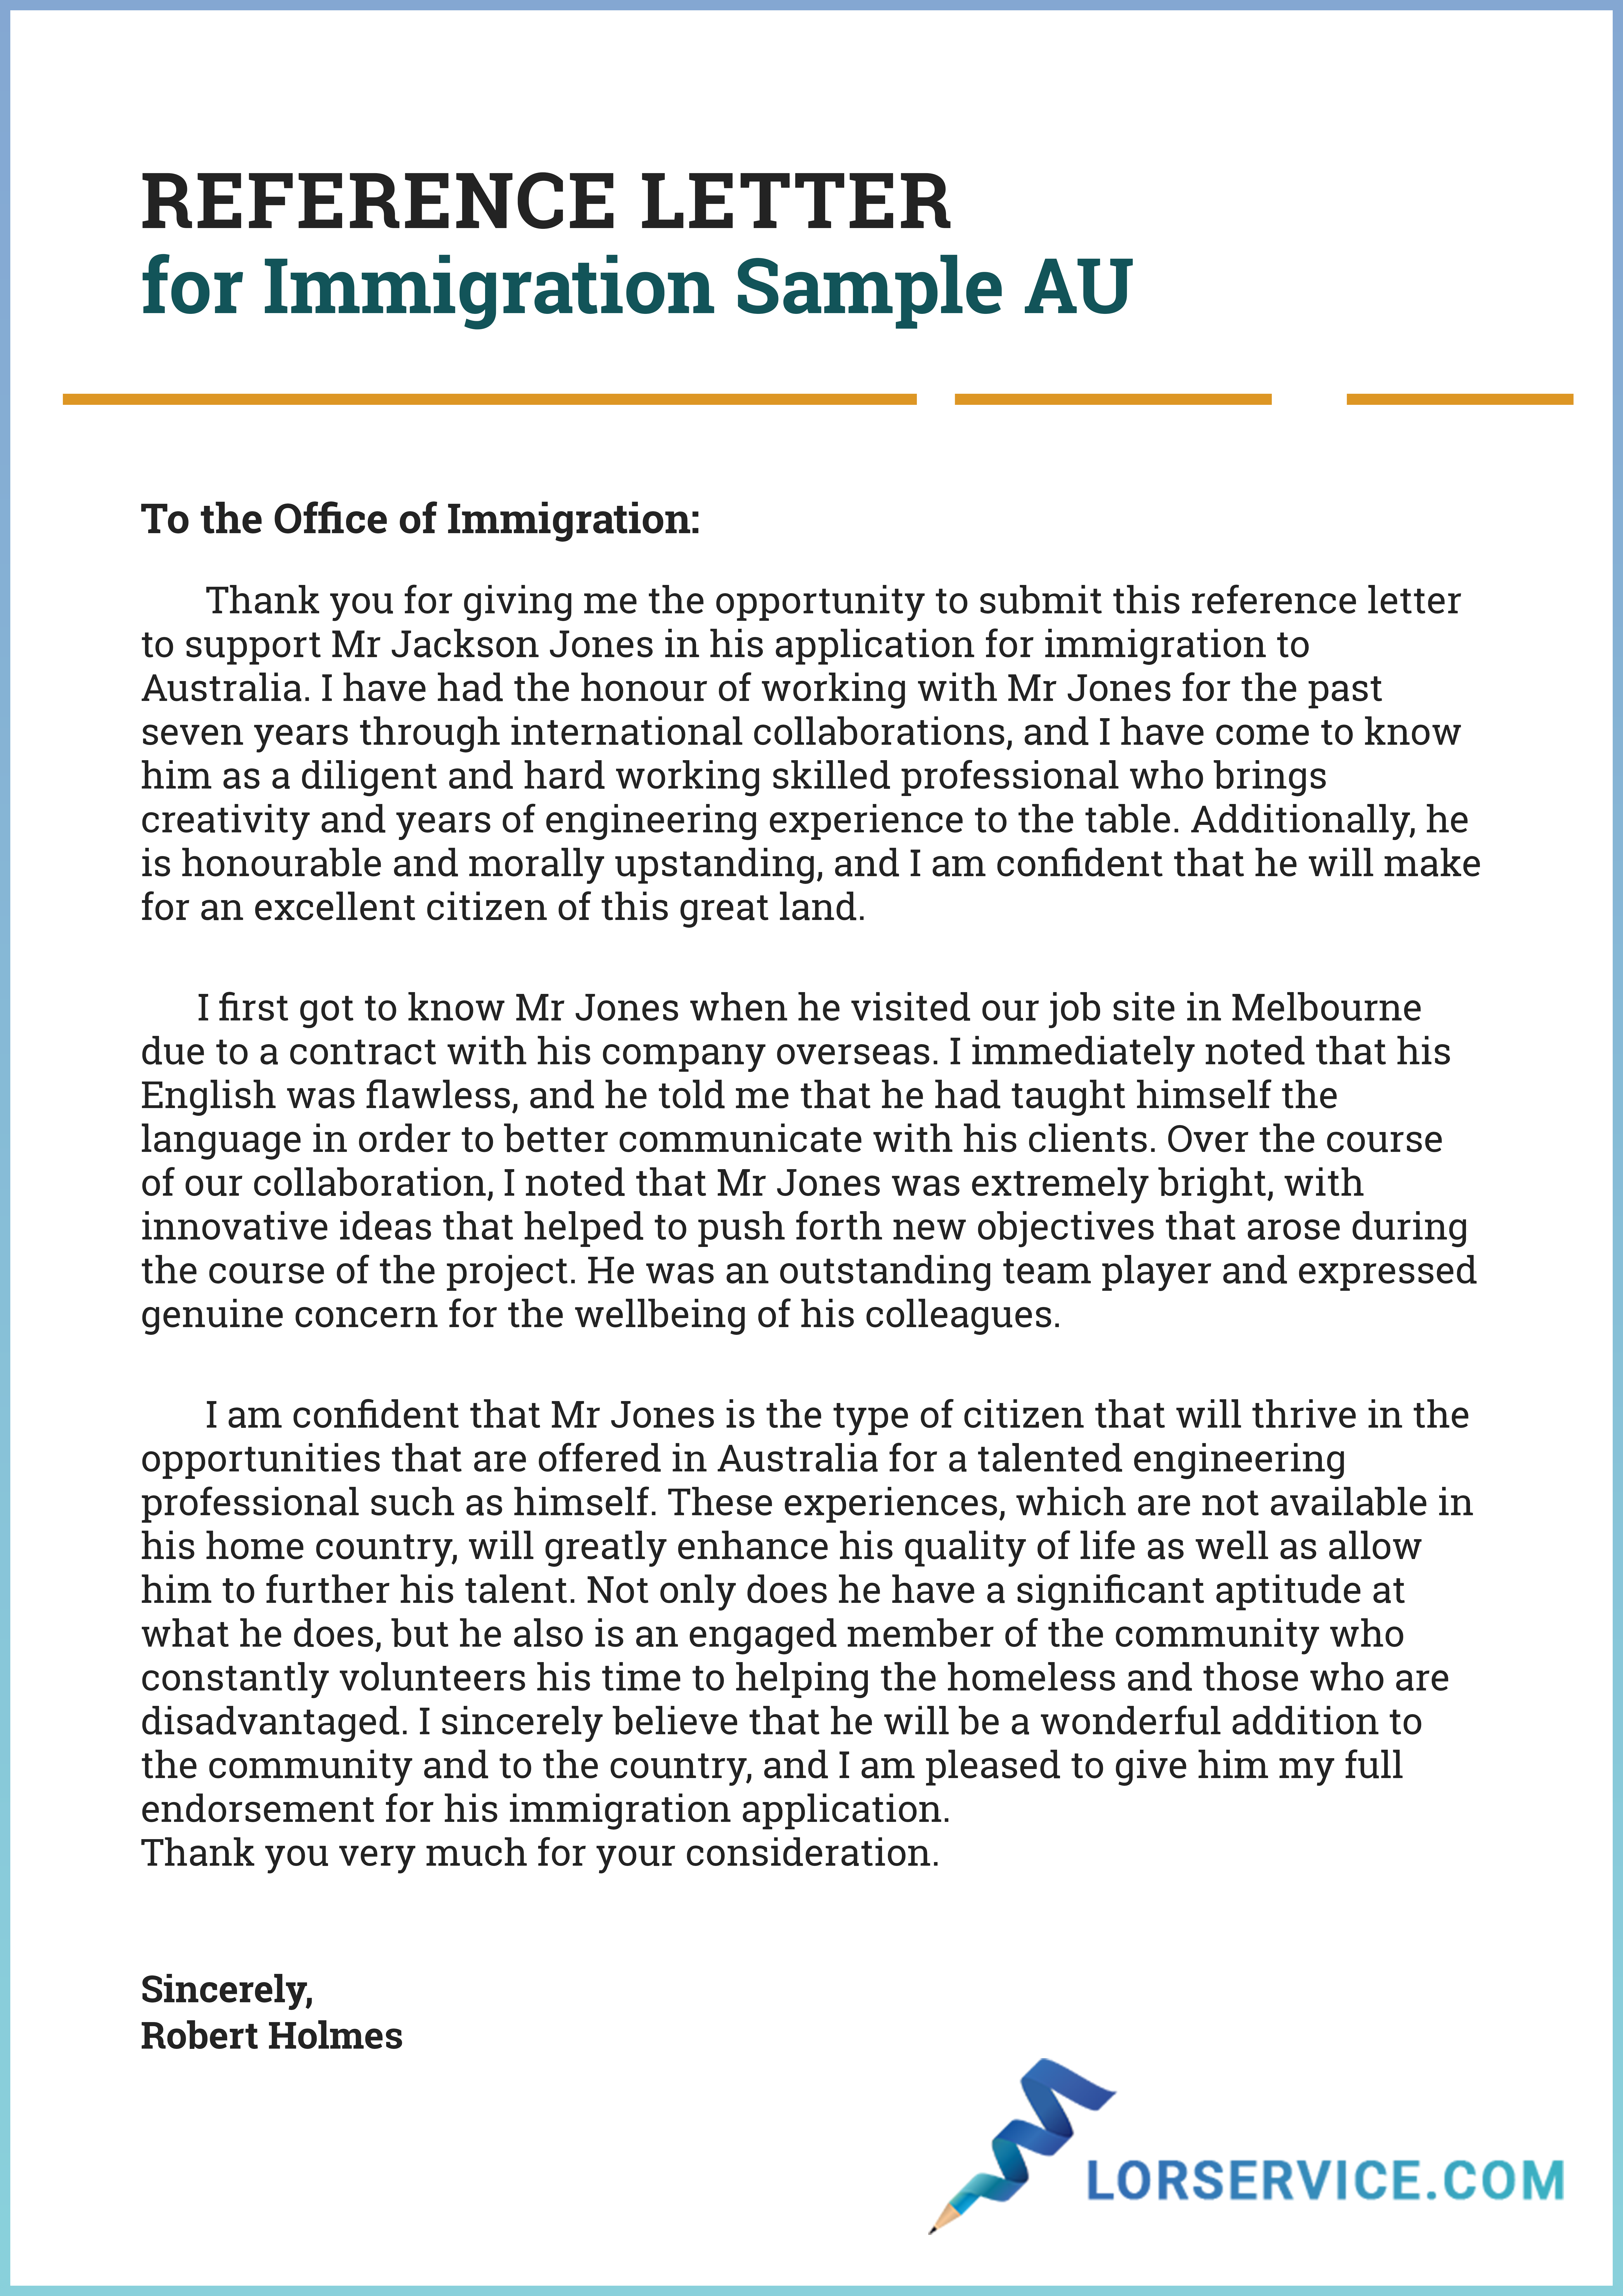 Letter For Immigration From Employer from www.lorservice.com